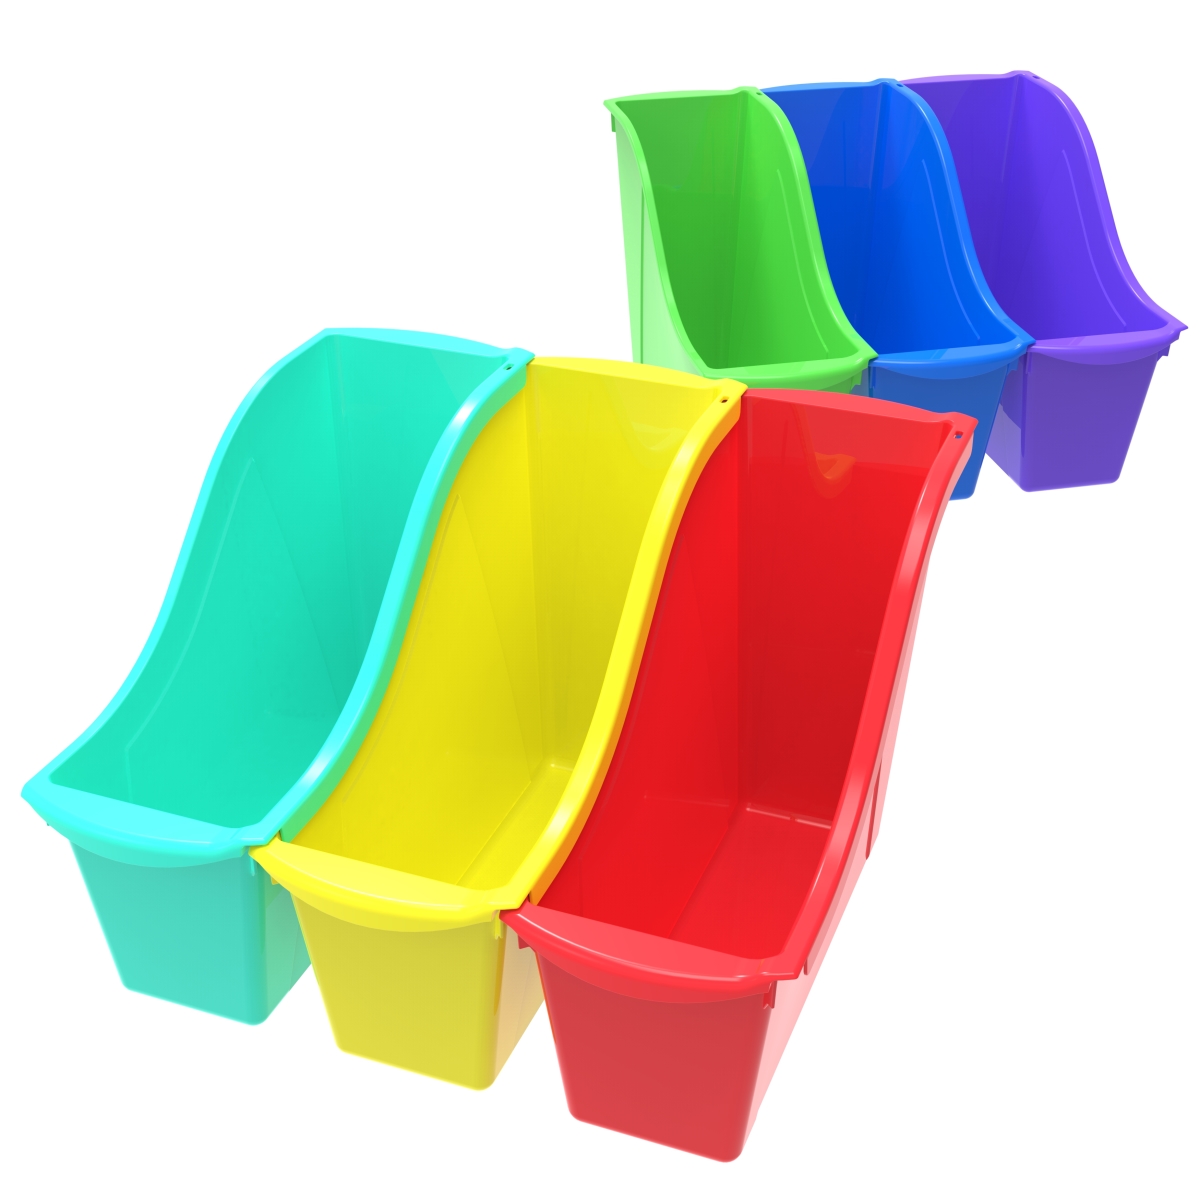 Picture of Storex 70113U06C Small Book Bin, Assorted Color - Pack of 6